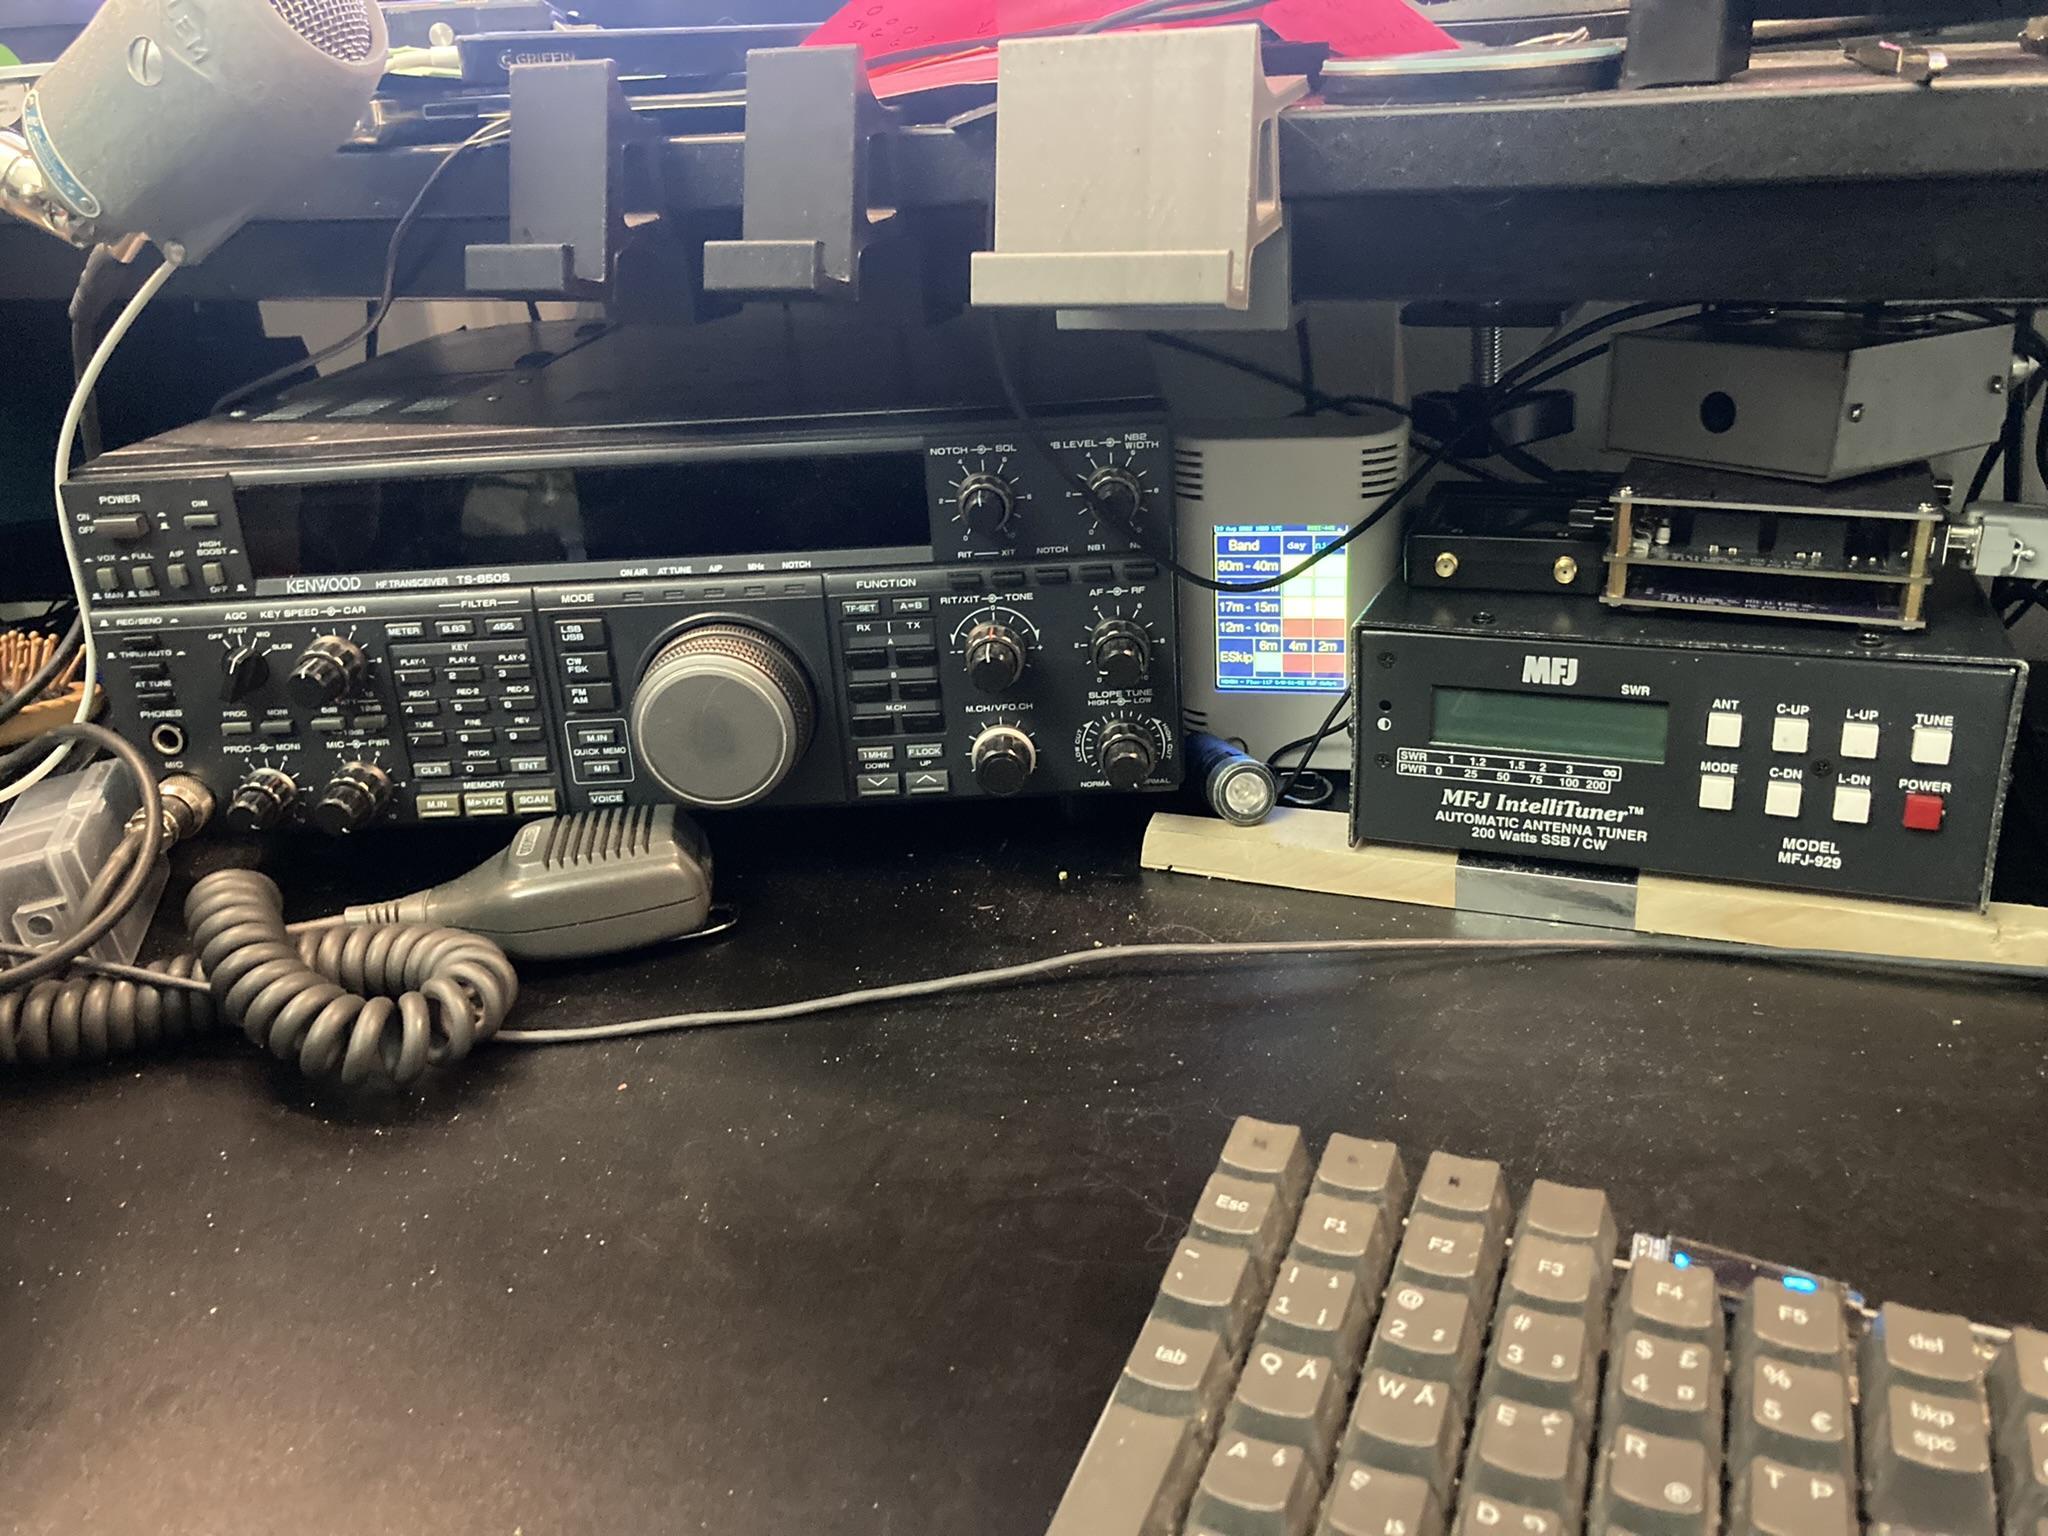 This is my main computer bench with my radios I uses. Actually a Kenwood TS-850S (on the left) connected to MFJ-929 that switches between my EFHW and a Dummy Load. Not shown on the right is a Xiegu G90.